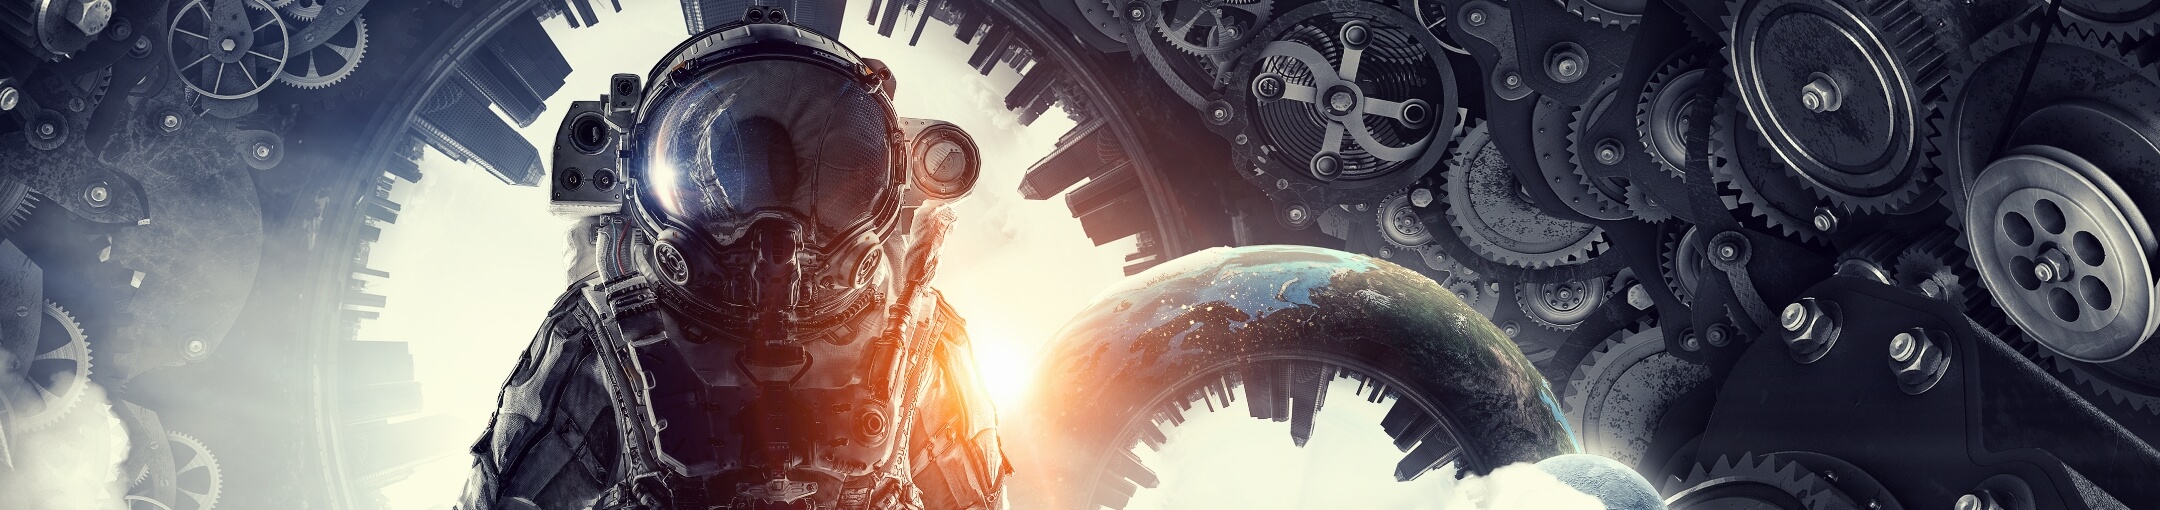 A generated image showing a pilot surrounded by several gears and machine parts with a warped and inverted view of a planet beside them.